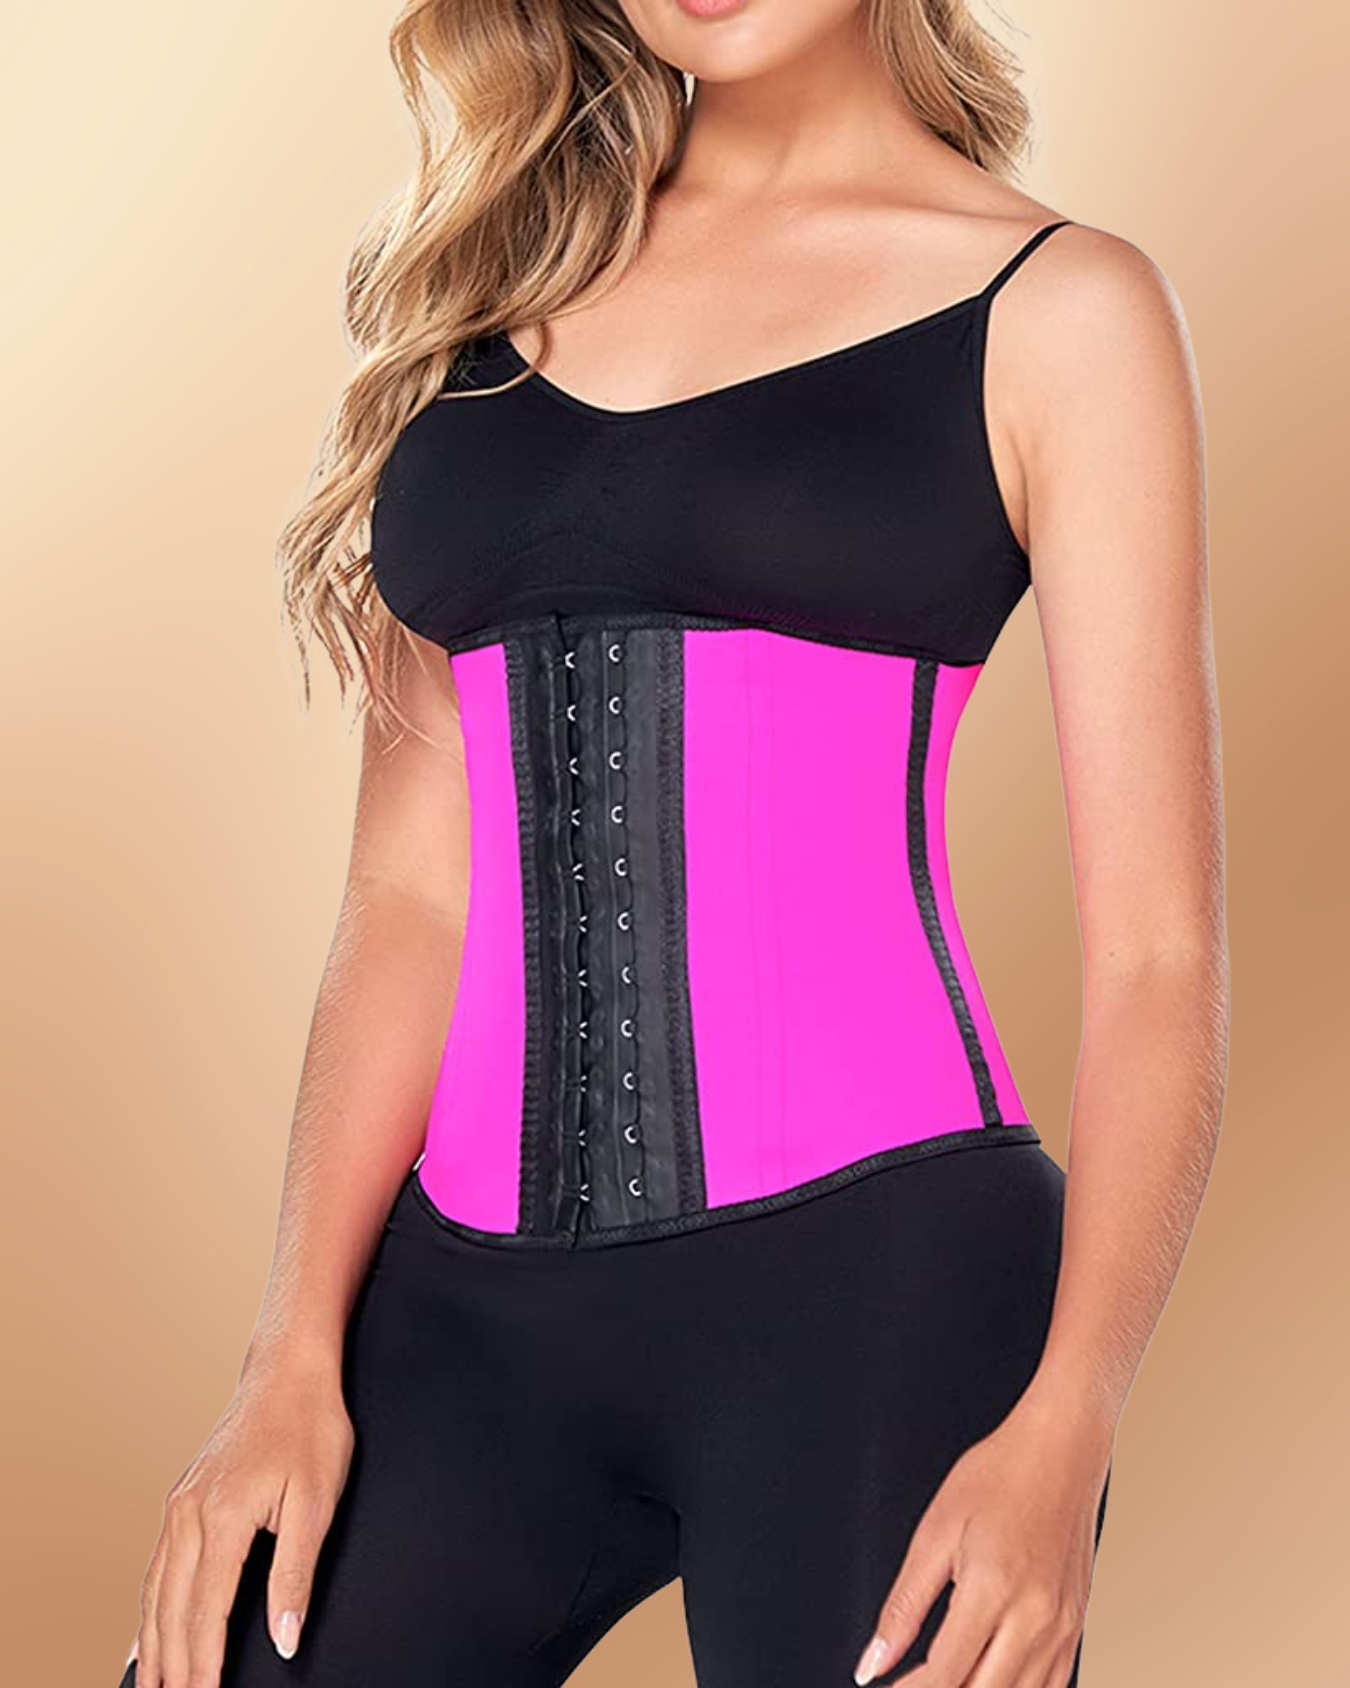 7 Best Waist Trainers to Help You Slim Down and Look Fabulous!